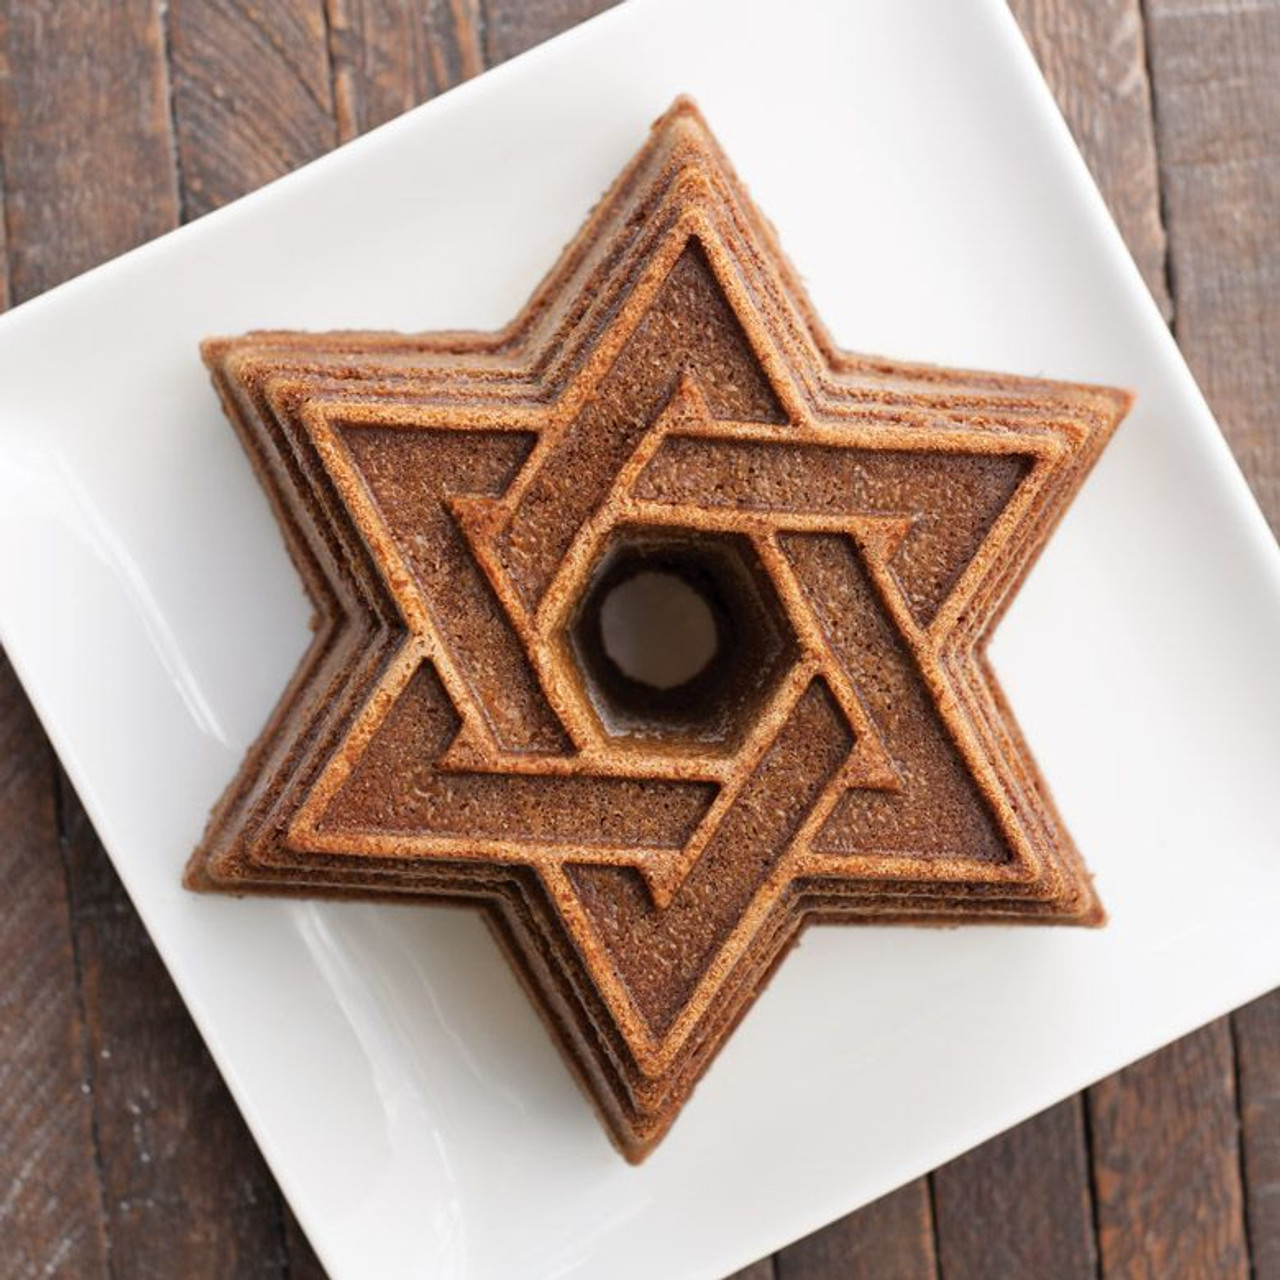 https://cdn11.bigcommerce.com/s-hccytny0od/images/stencil/1280x1280/products/725/3991/nordic-ware-star-of-david-bundt-pan-2__57625.1514679853.jpg?c=2?imbypass=on